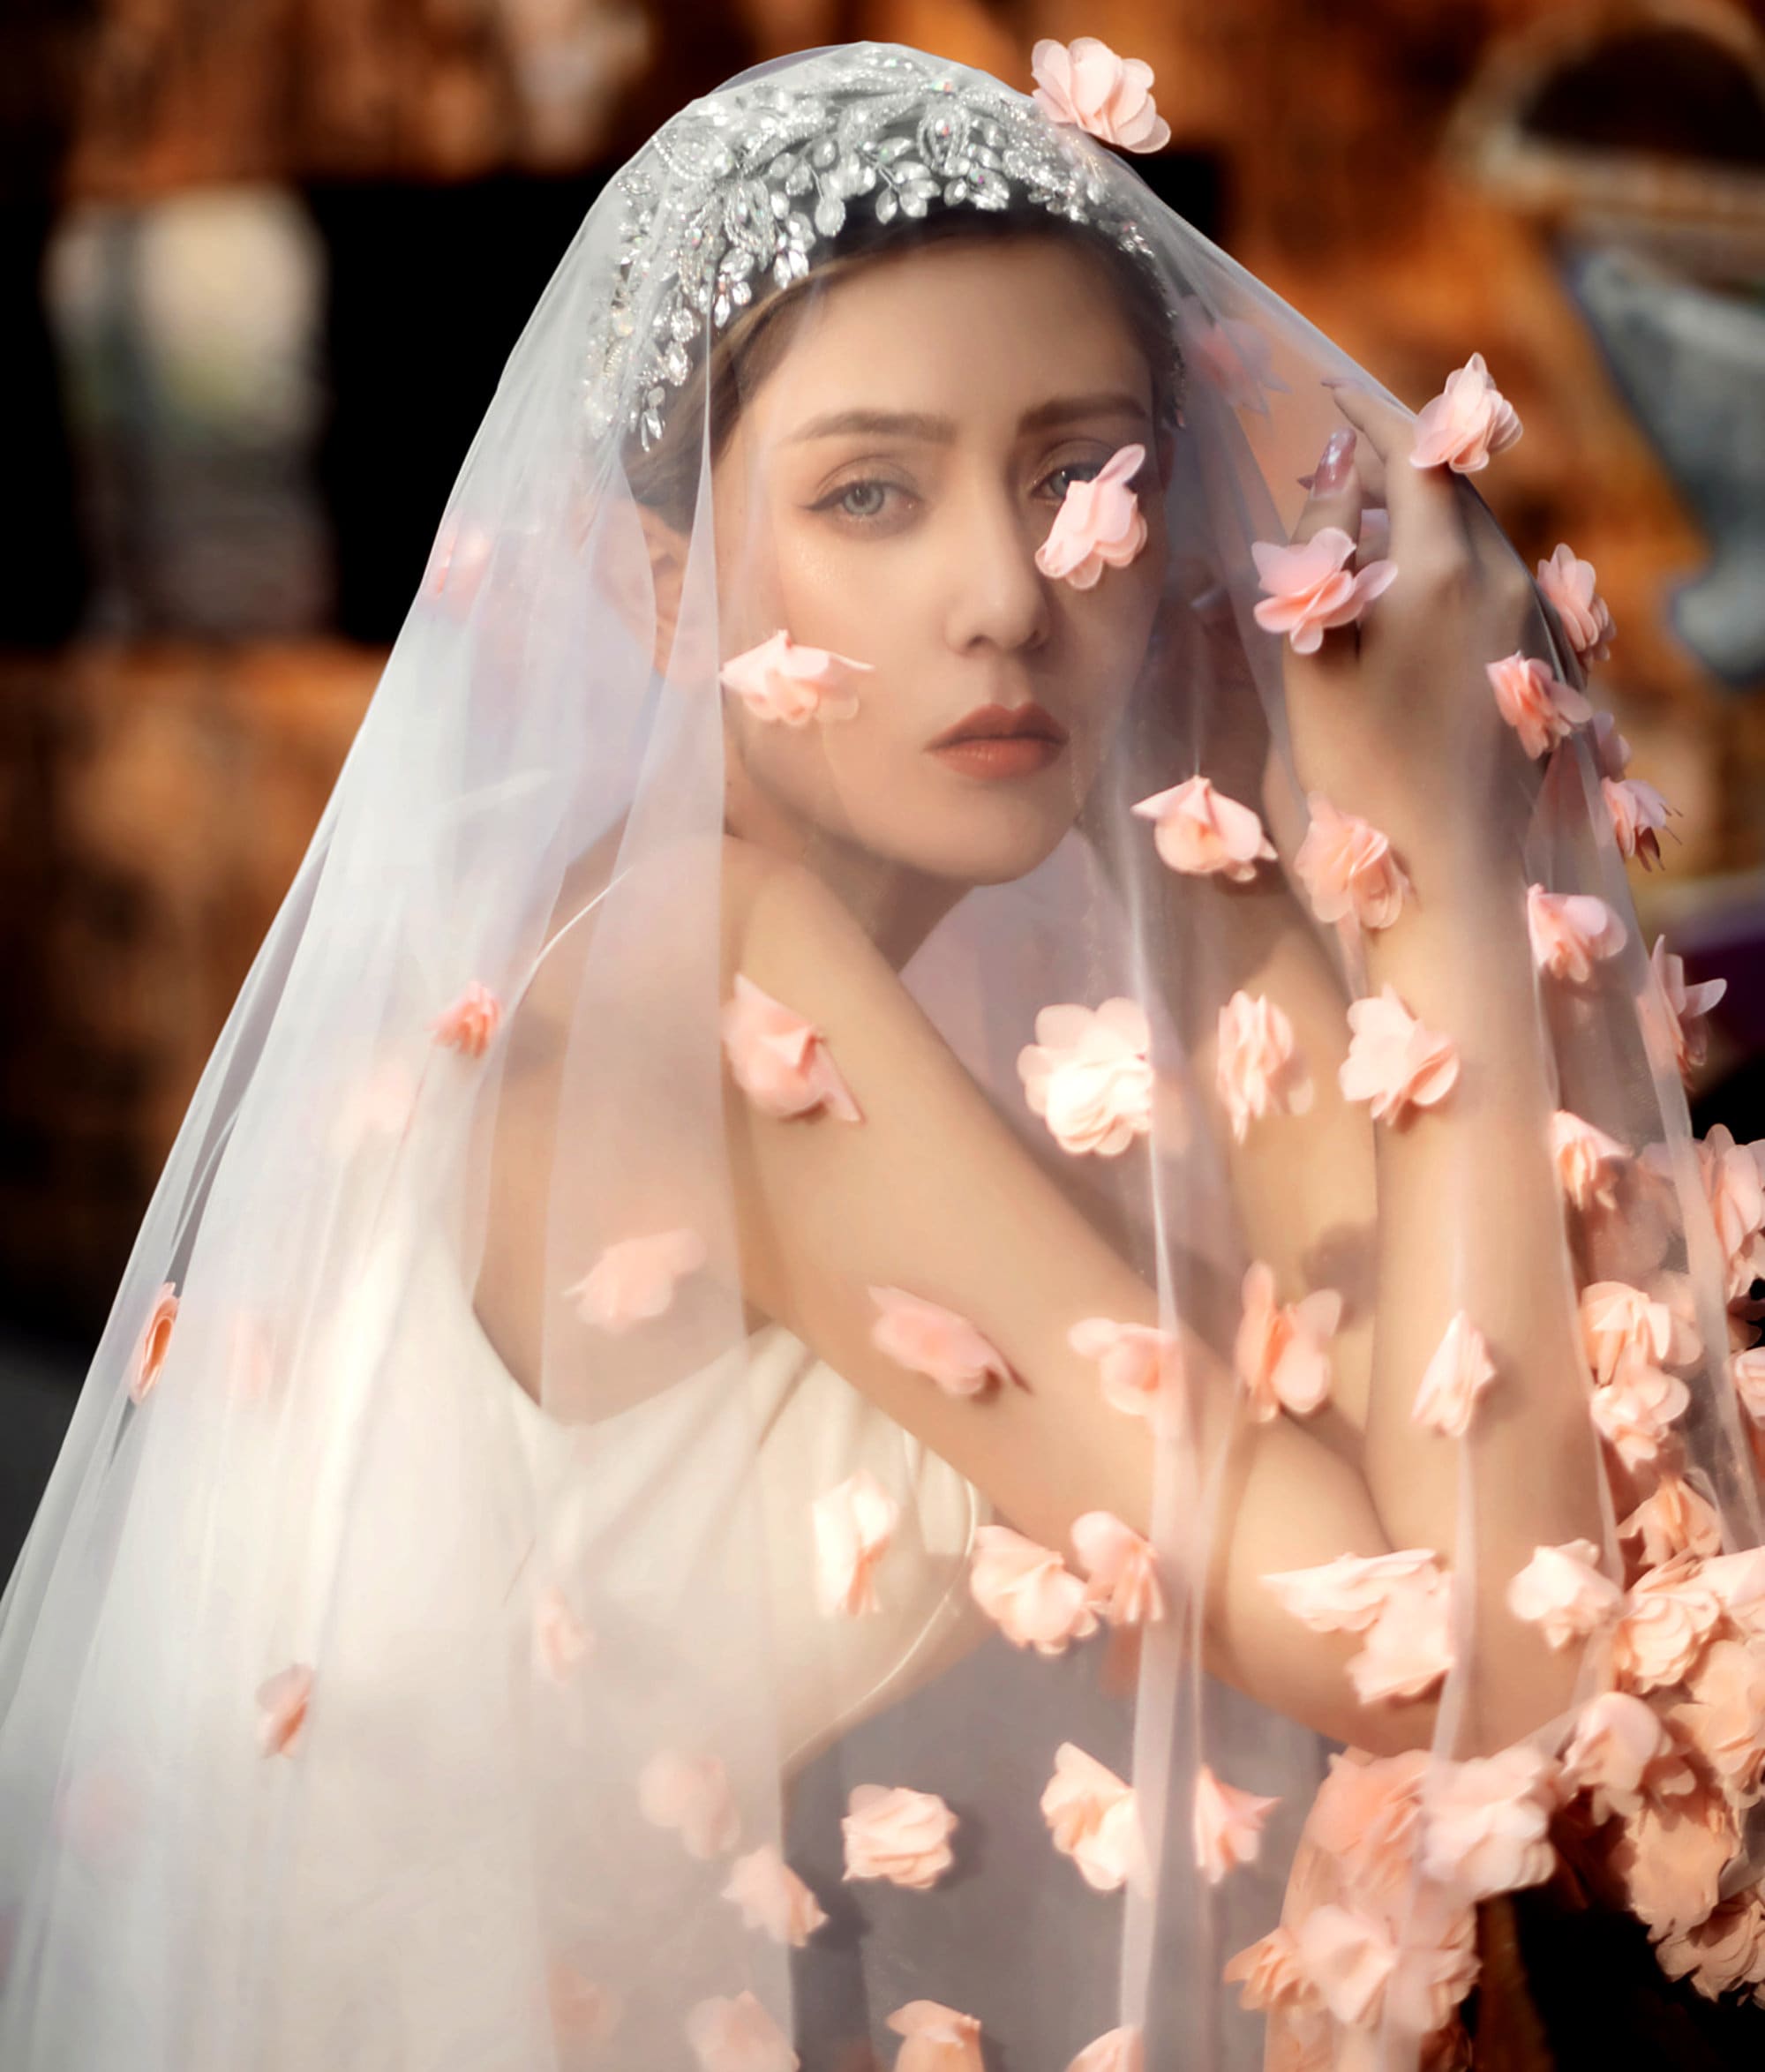 Custom Veils For Weddings & Bachelorette Parties - Sprinkled With Pink